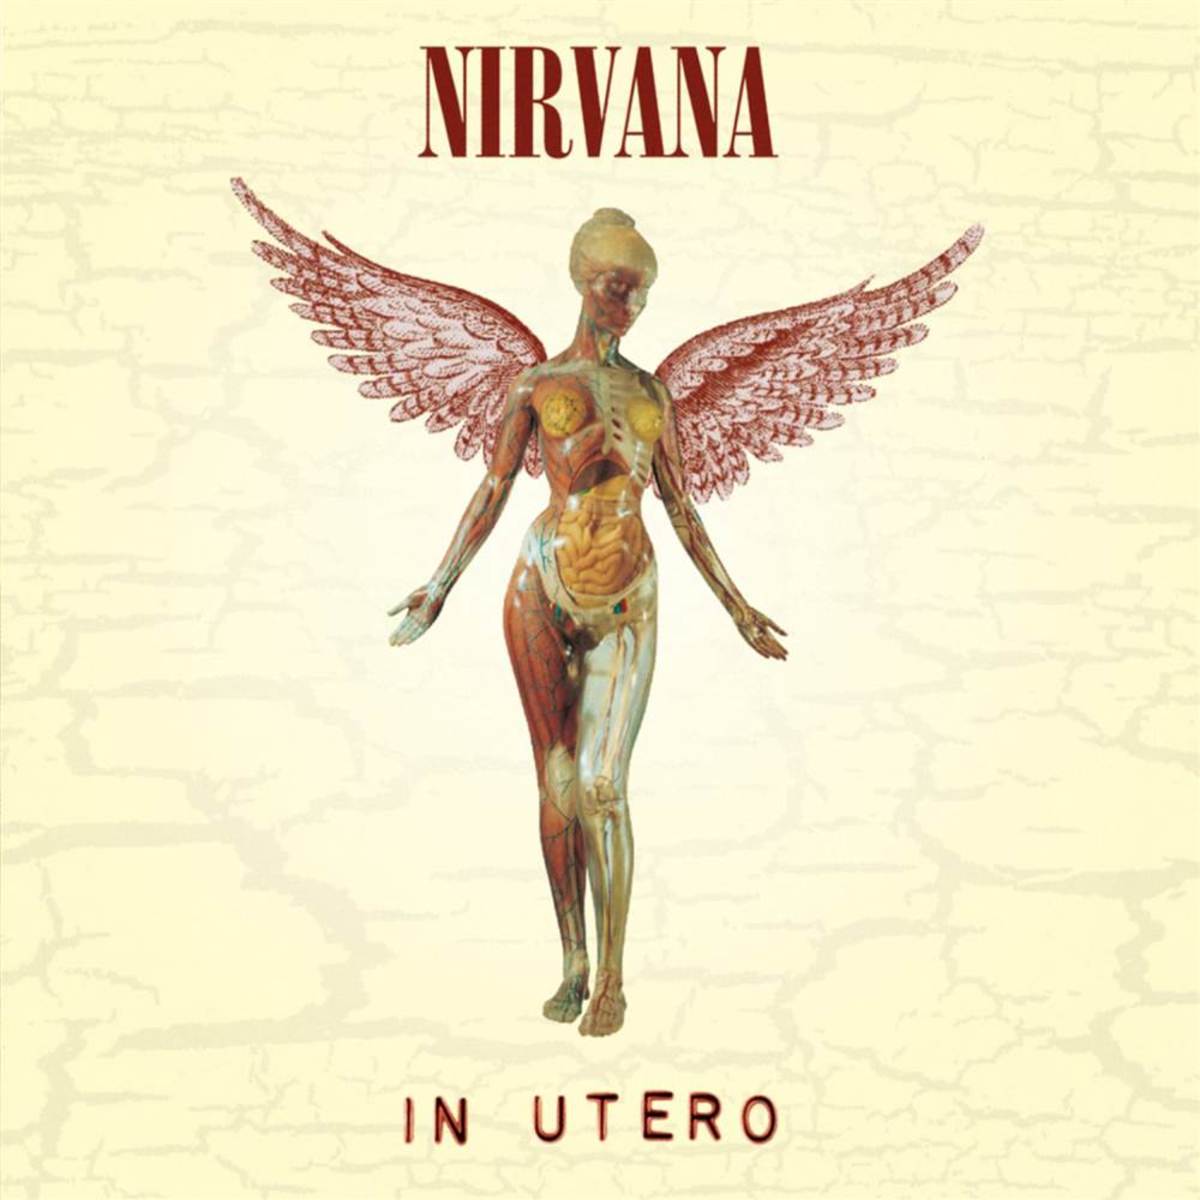 This cover of the album In Utero continues the tradition of strange album covers by Nirvana. The music is better though.